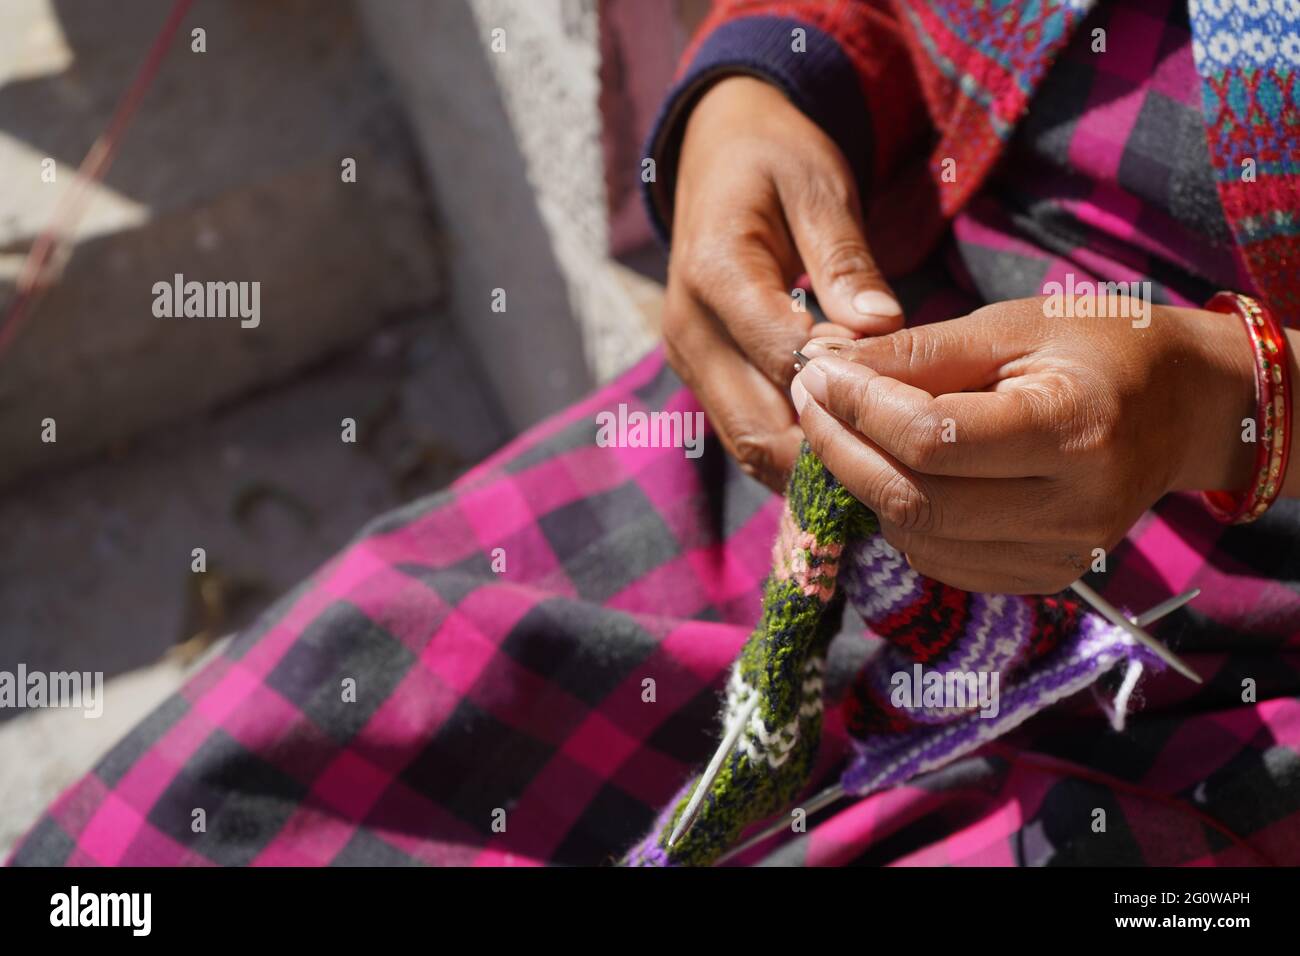 Closeup shot of the hands of a women sewing woolens Stock Photo